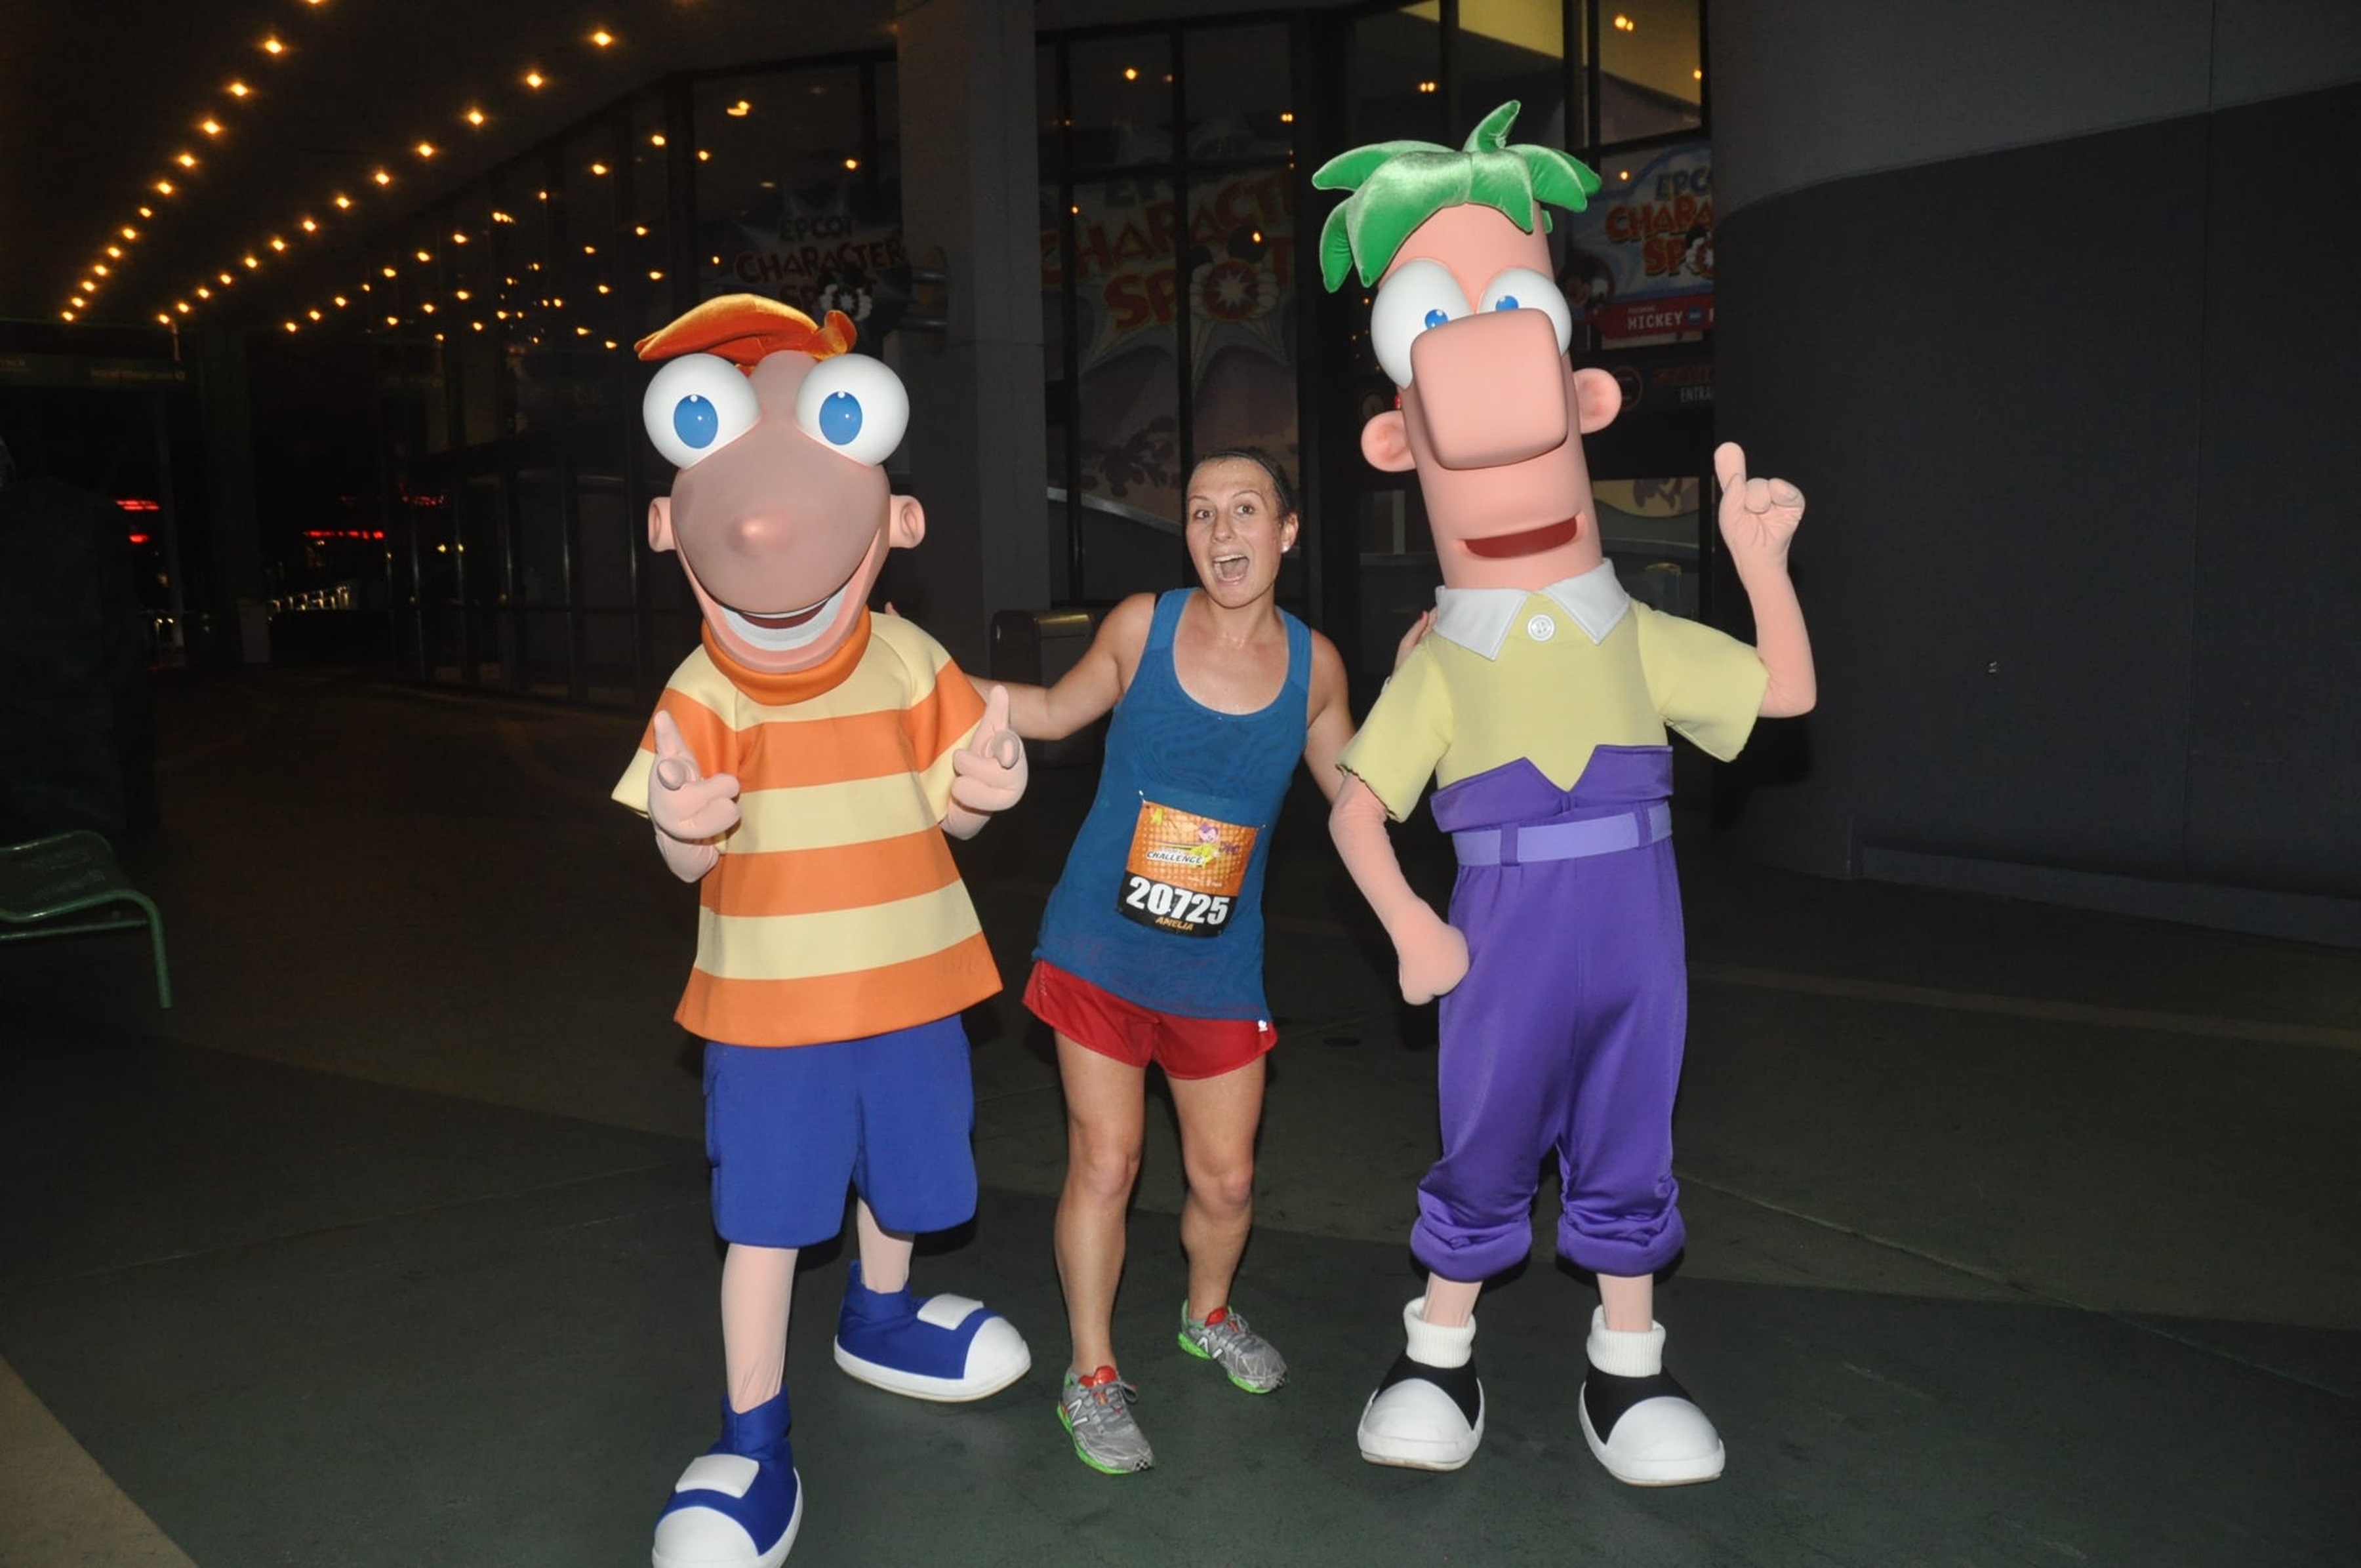 Phineas and Ferb!